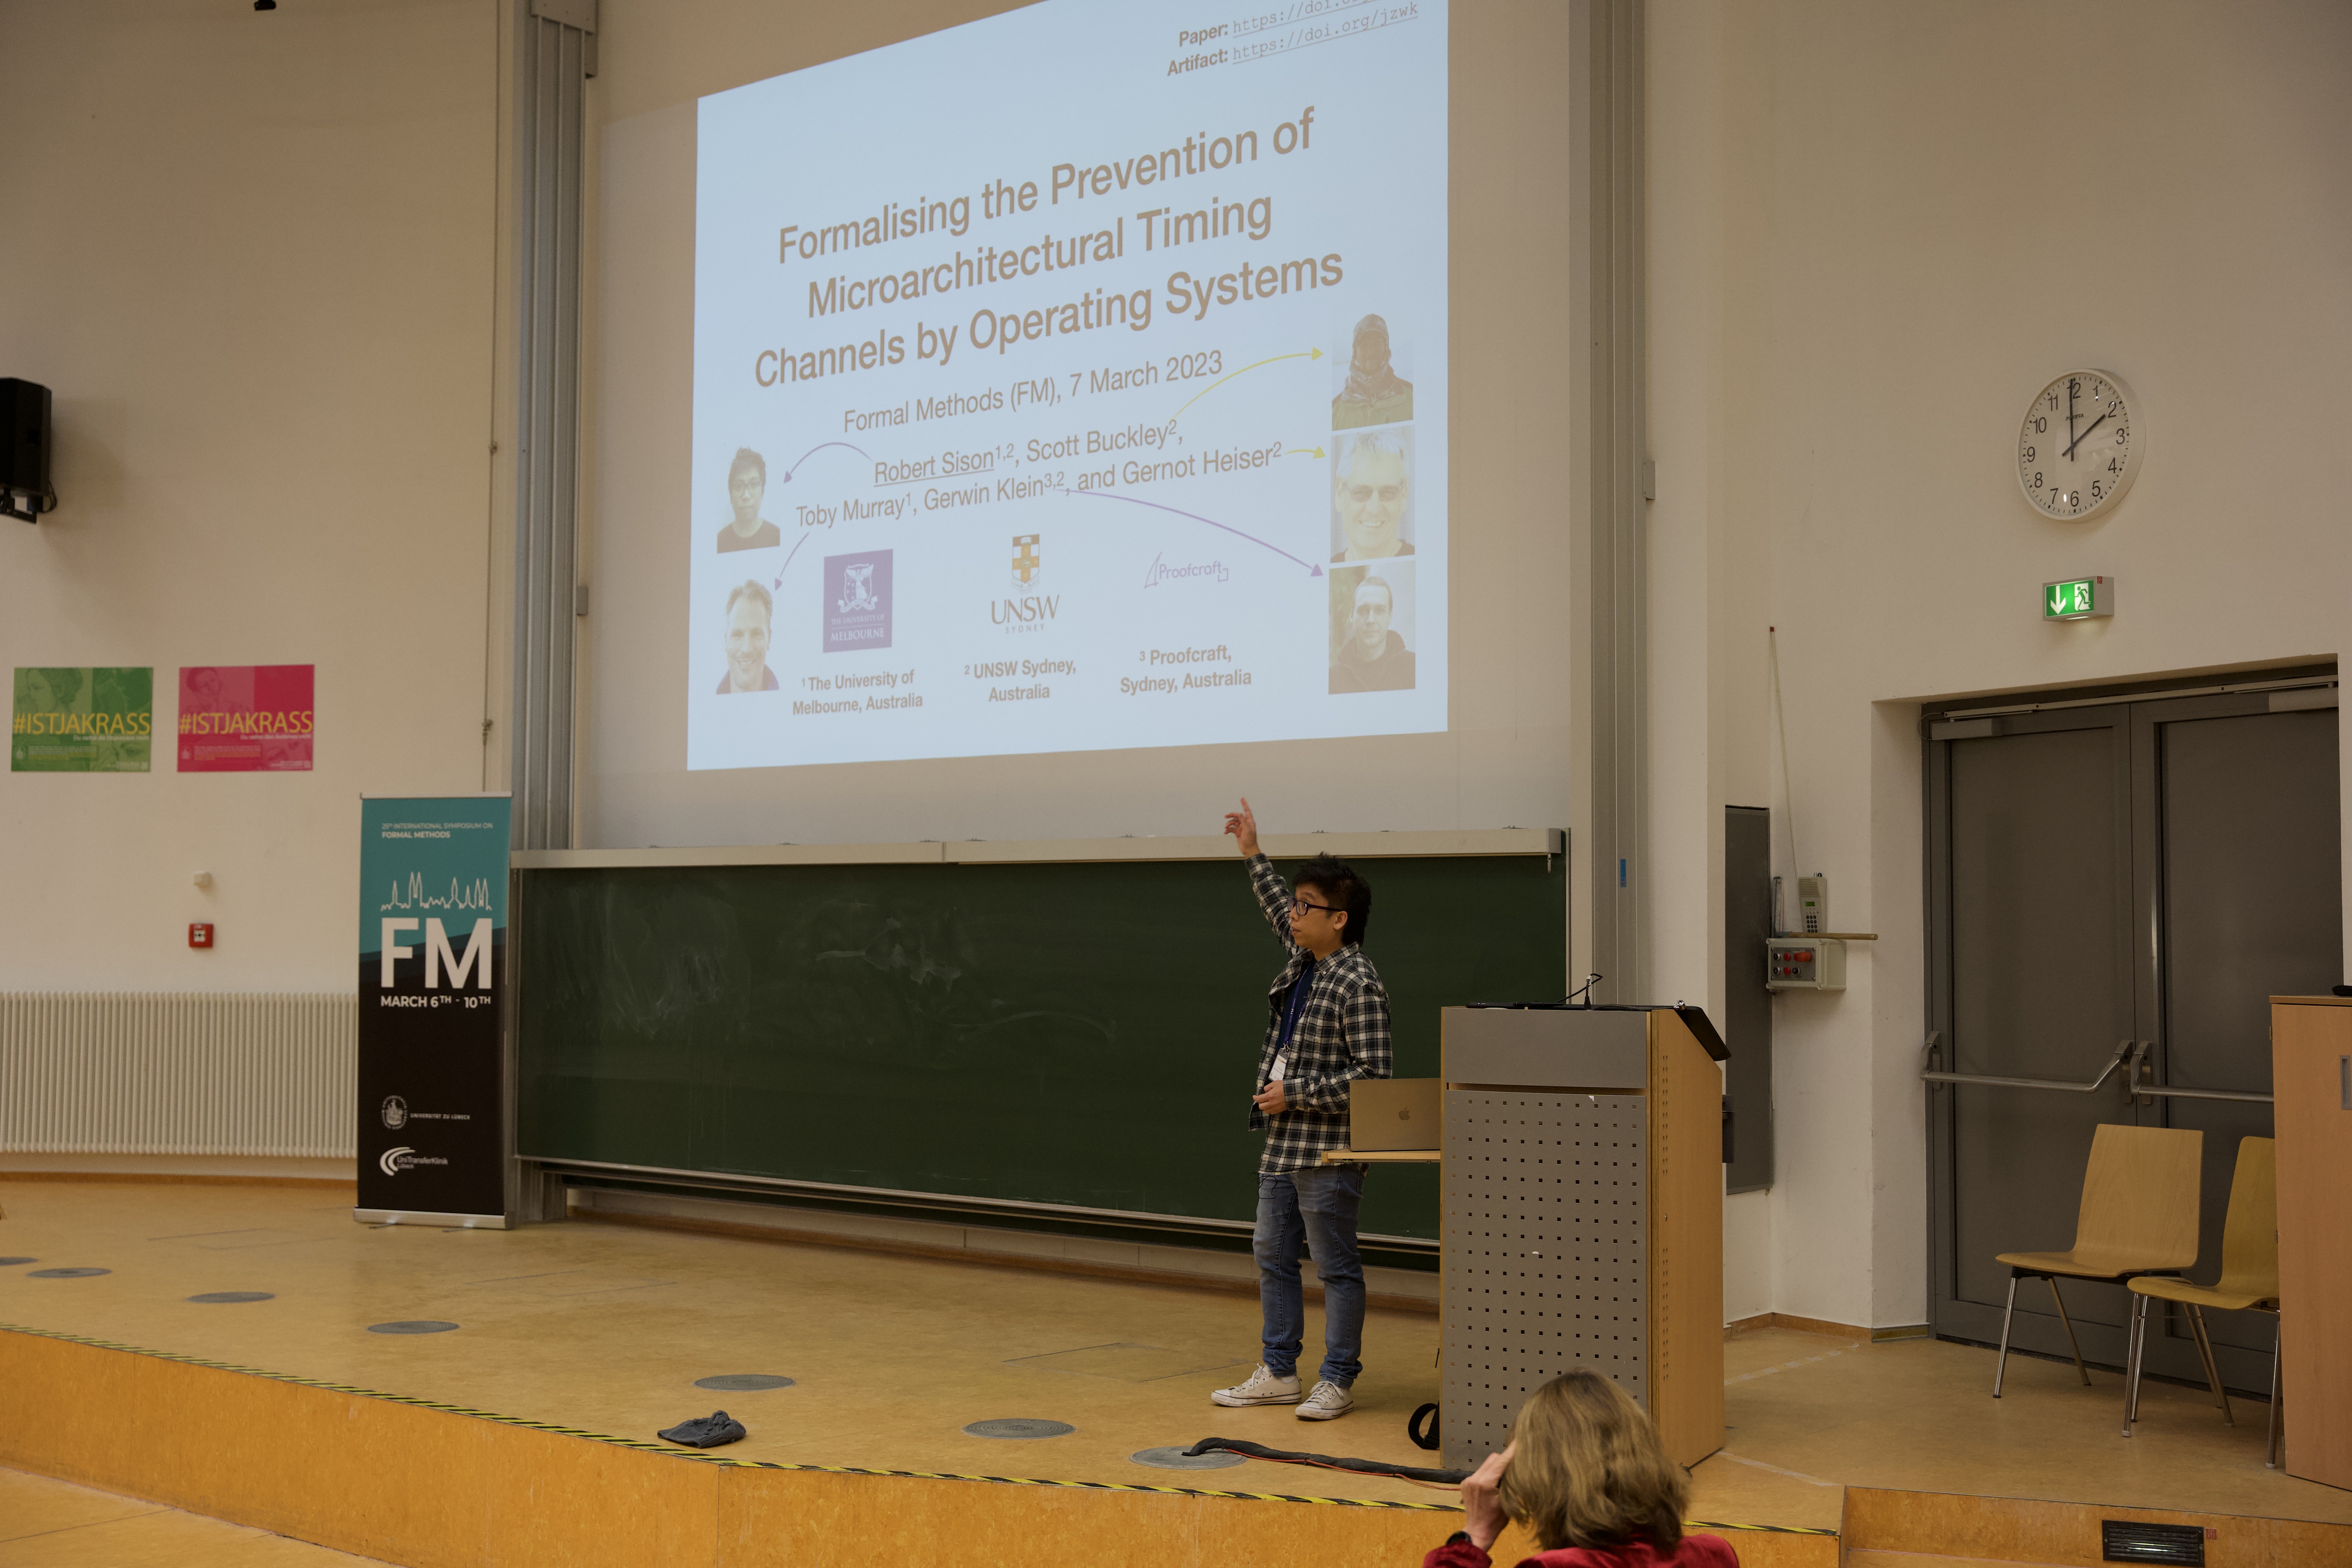 Rob Sison at the International Symposium on Formal Methods in Germany, March 2023